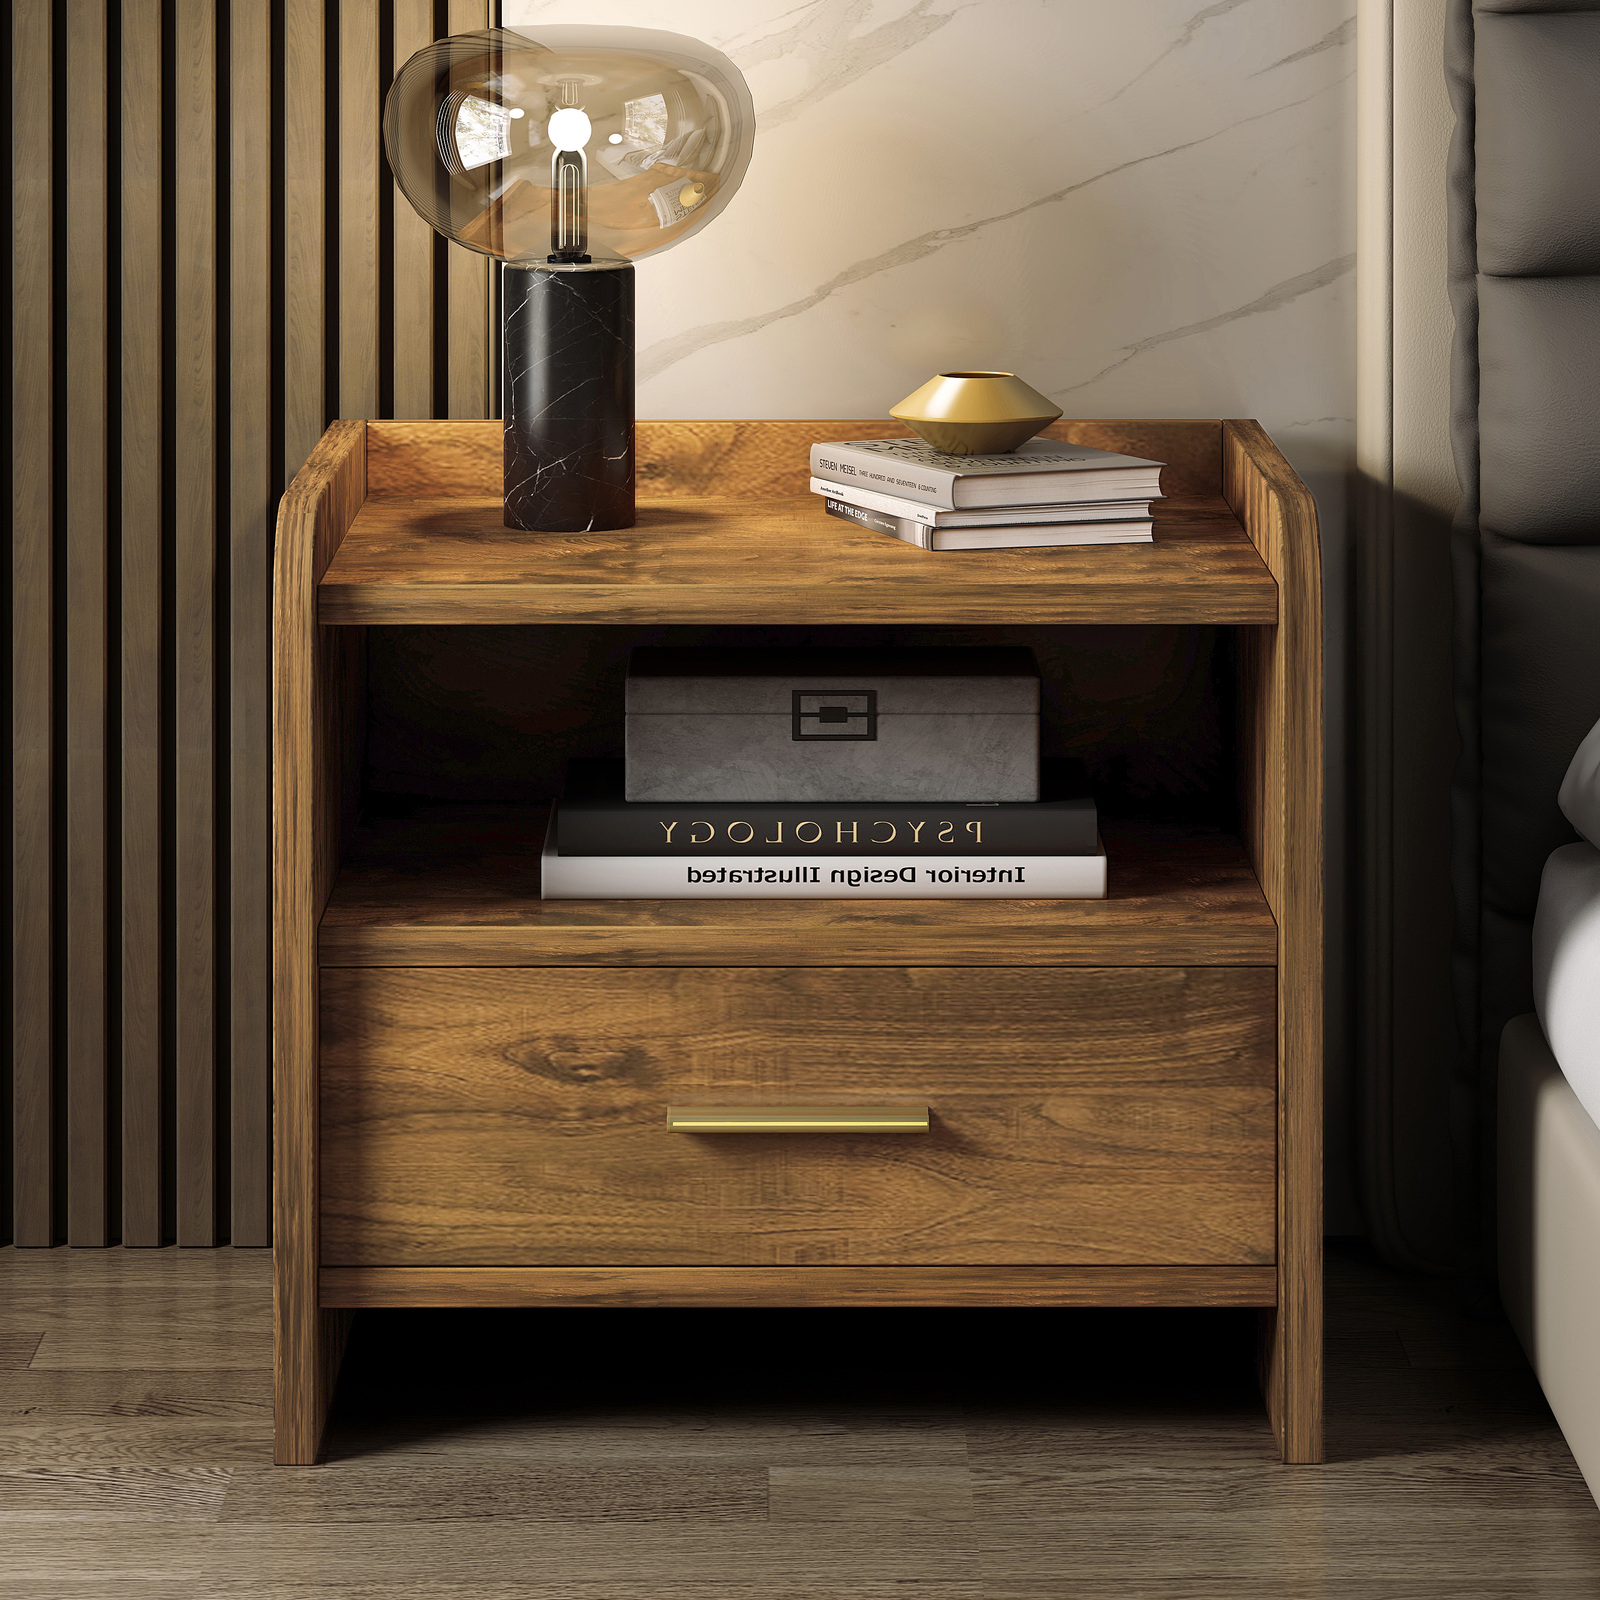 Serene Bedside Table Nightstand with Drawer (Rustic Wood)